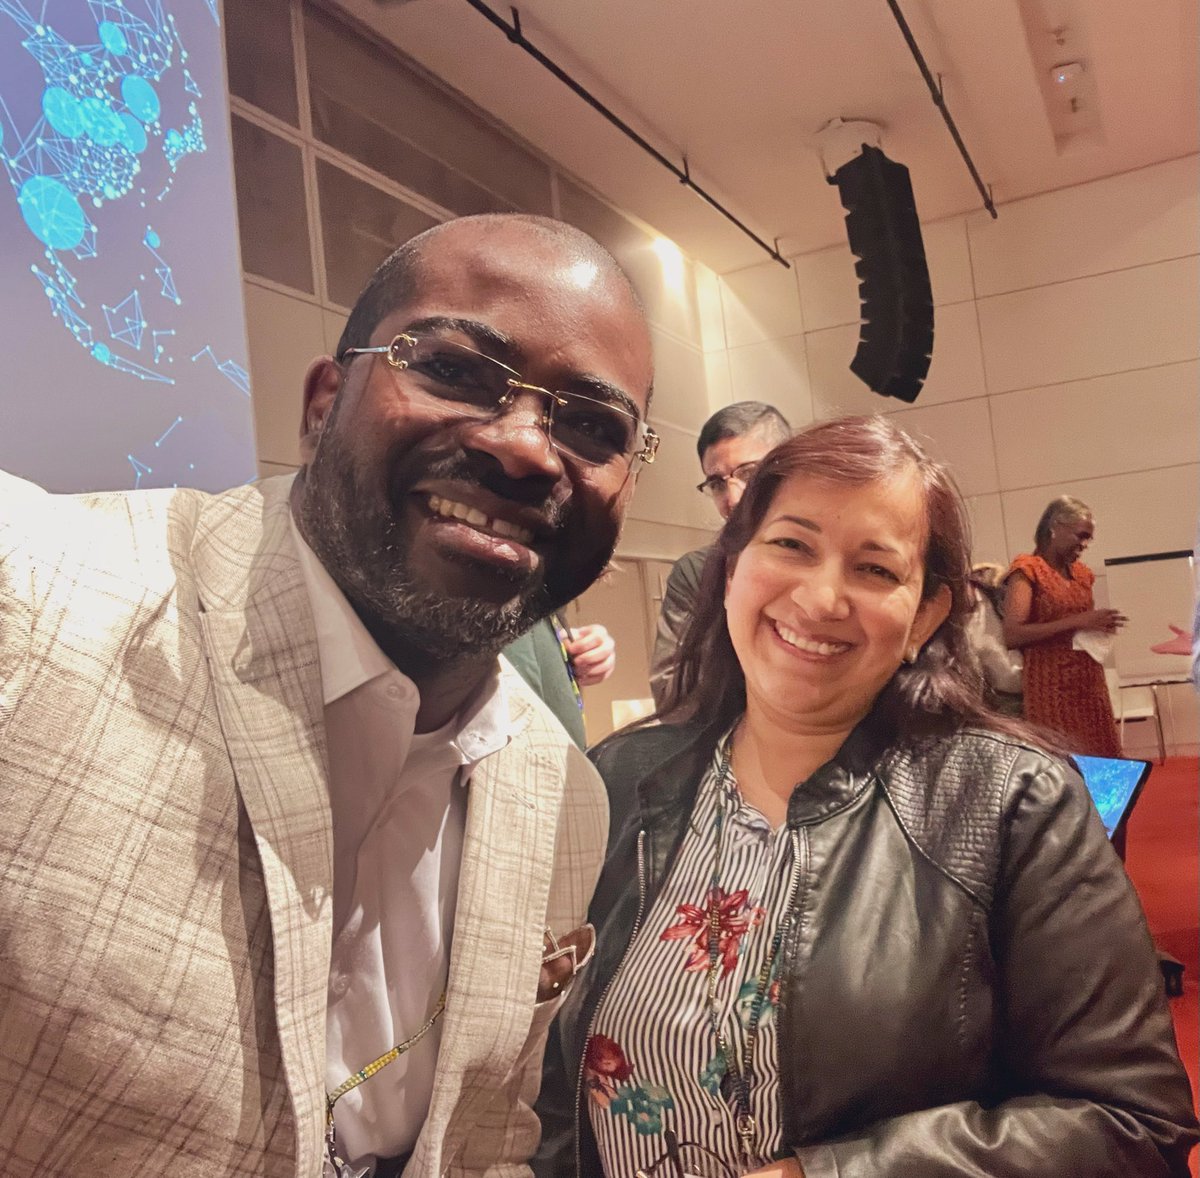 Delighted and honoured to finally meet our collaborator tirelessly strengthening #genomicsurveillance capacity in DRC @PlacideMbala @inrb_kinshasa @labgenpath #grandchallenges @gatesfoundation @FINDdx